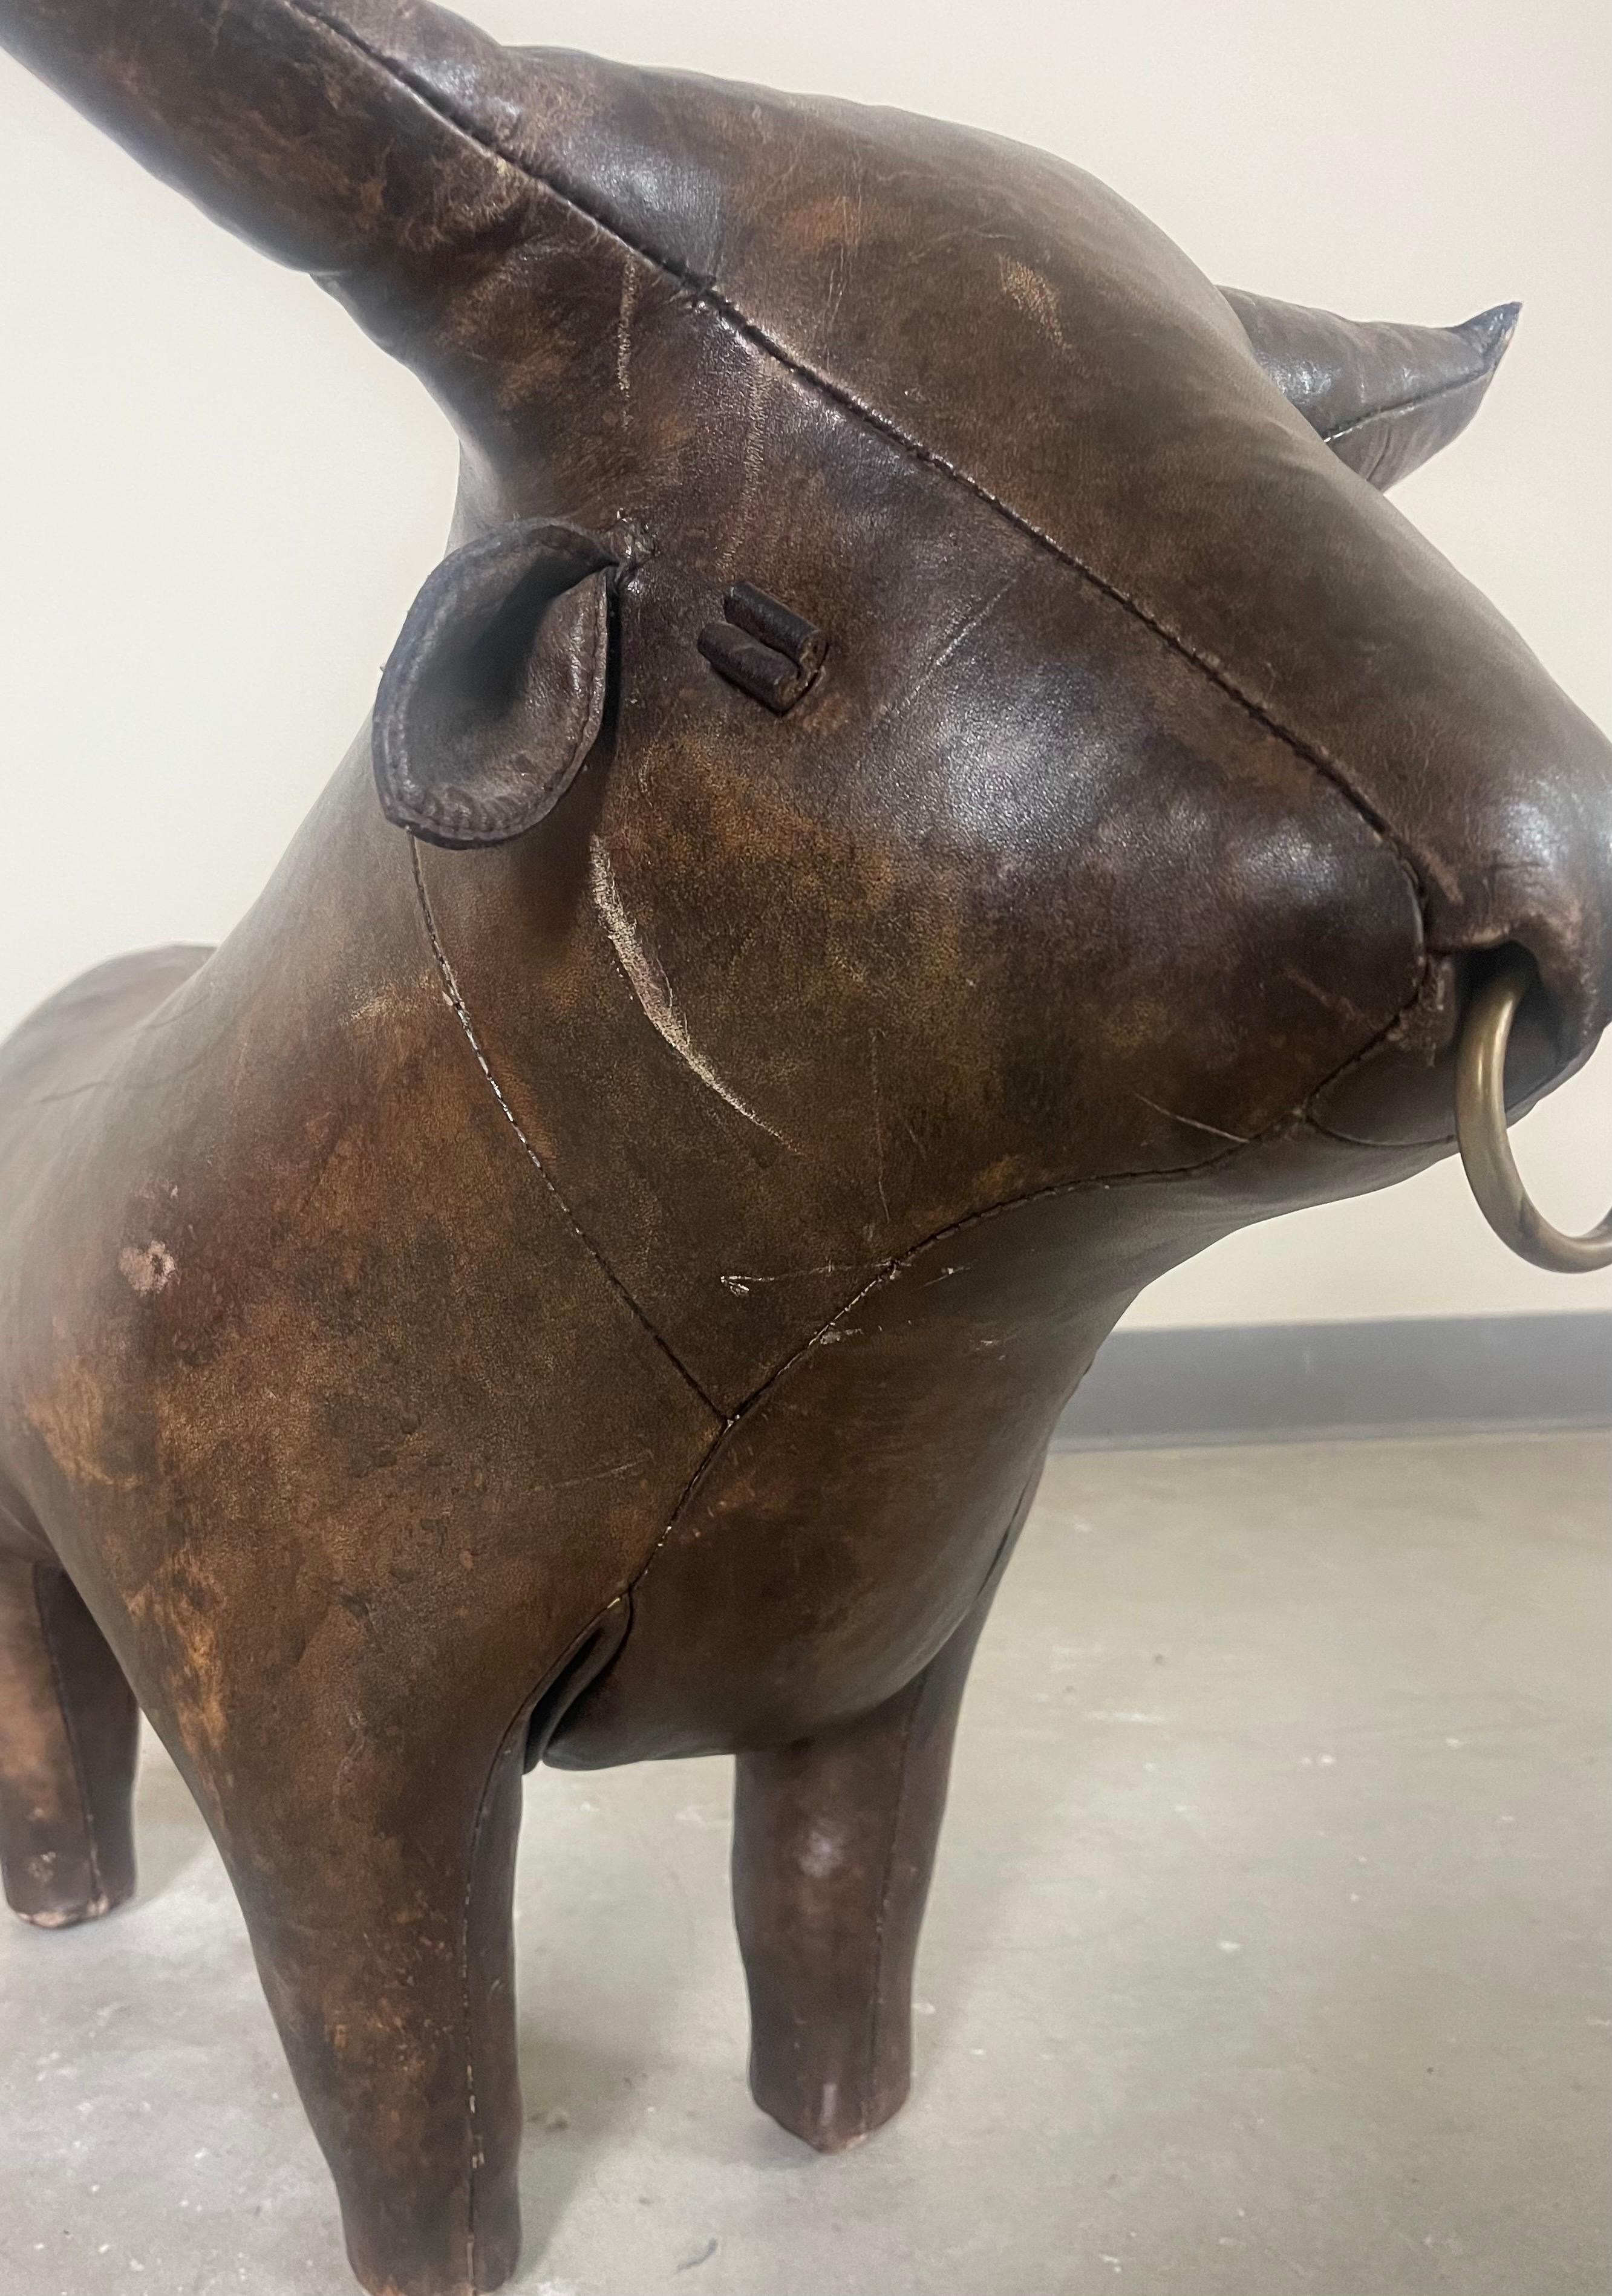 Vintage “Ranch Bull” in leather by Dimitri Omersa. First introduced in the 1960s by Abercrombie and Fitch. Maintains the original red tag by Omersa. Patina on leather and scuffing indicative of natural aging process.